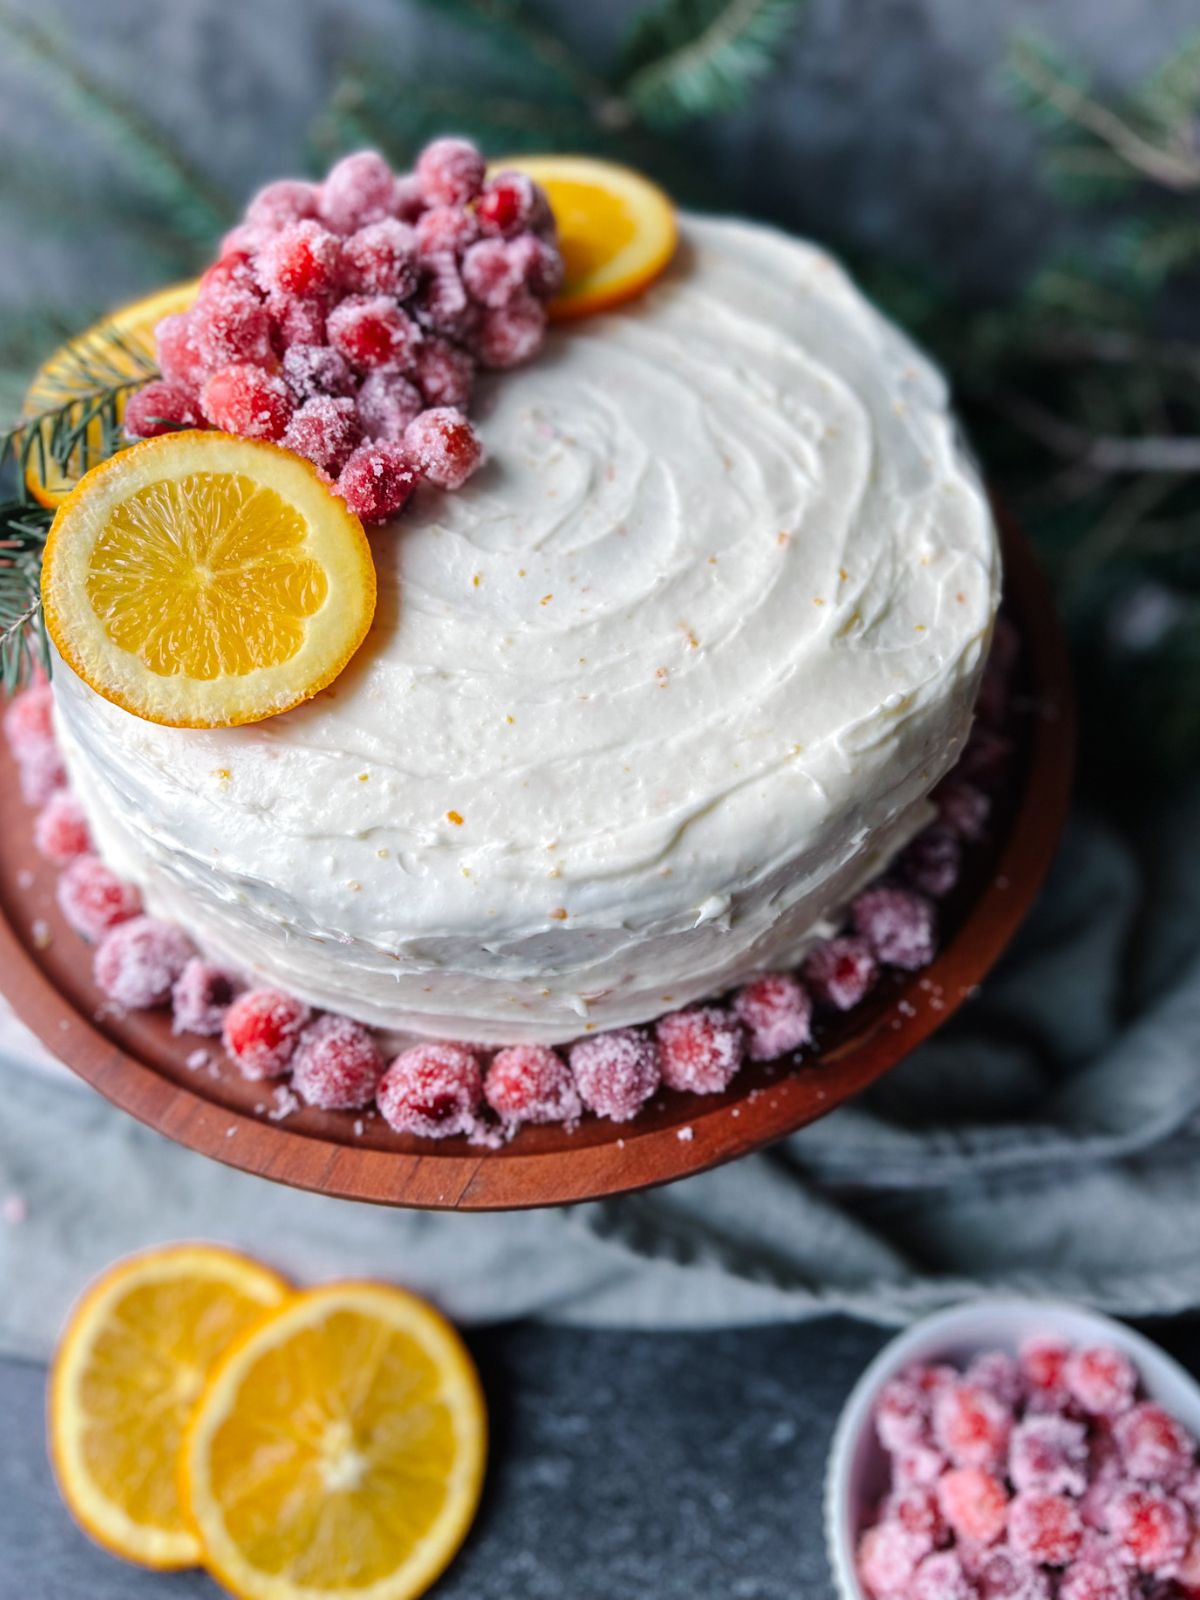 Cranberry orange cake on a wooden cake stand with spruce in the background and orange slices and sugared cranberries in the foreground.